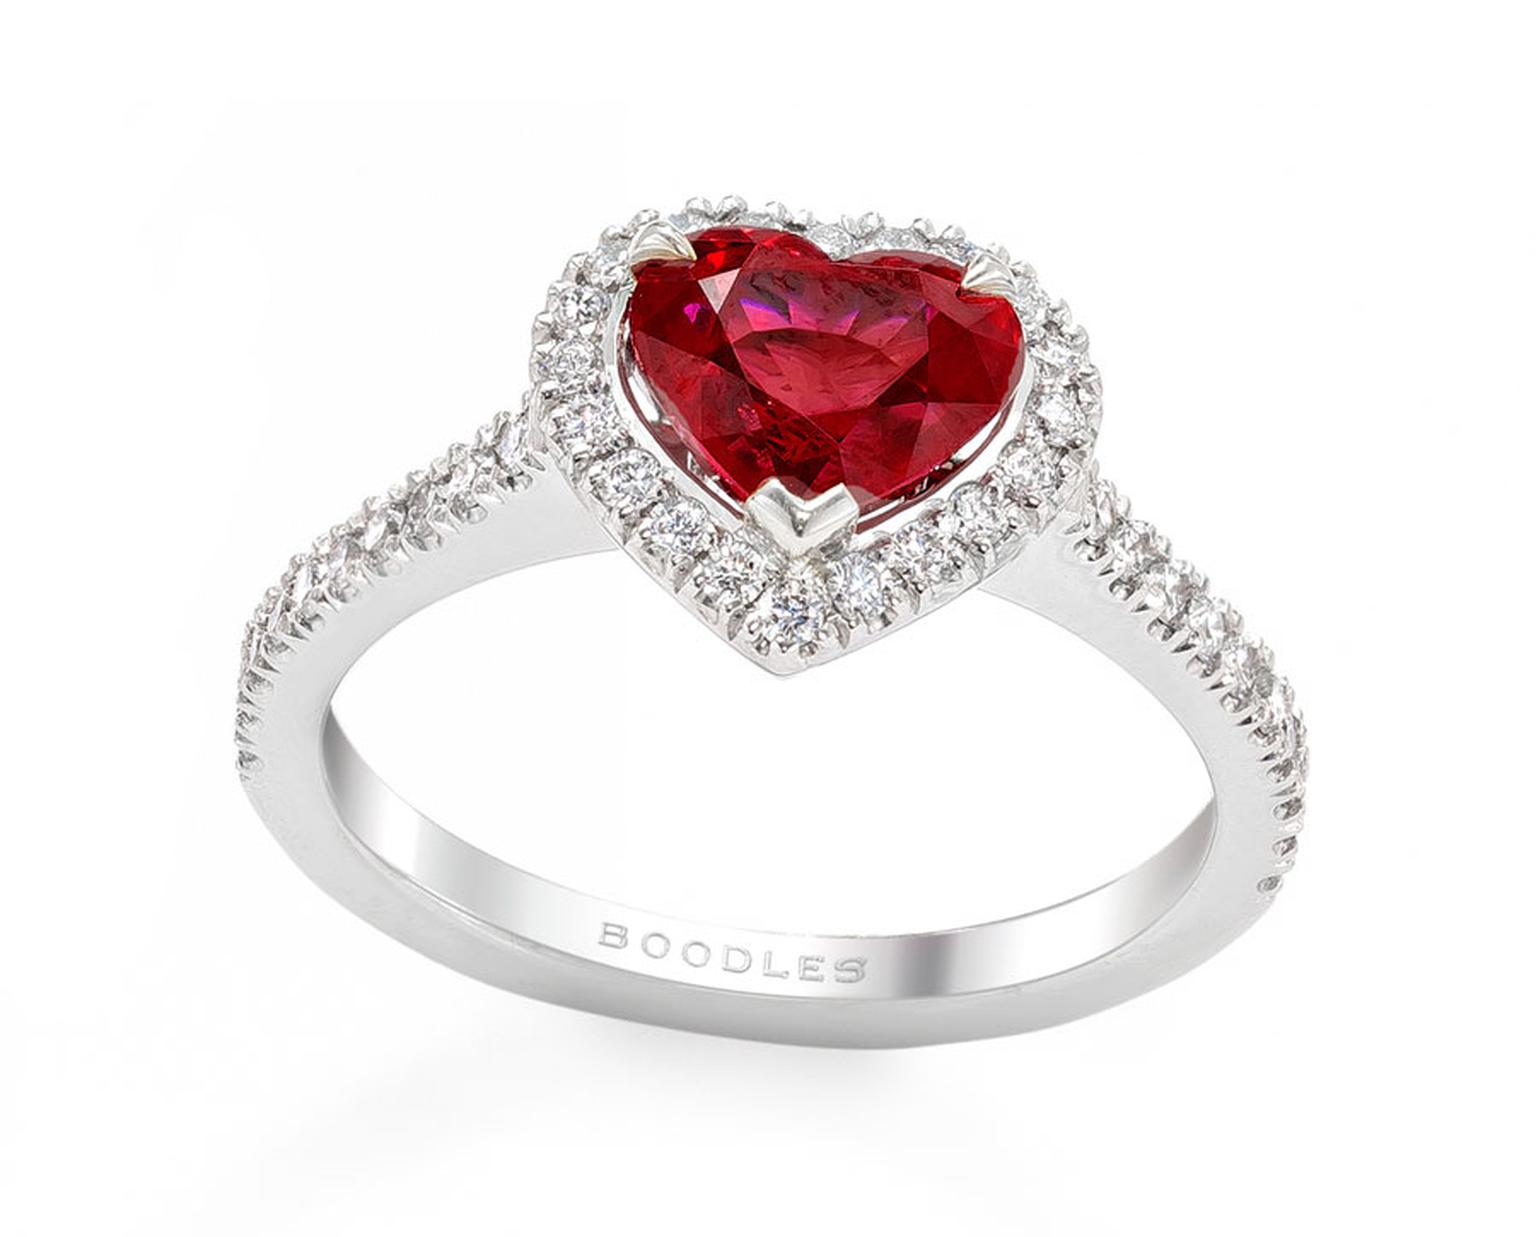 Boodles-pages64-65_5-VALENTINES.jpg